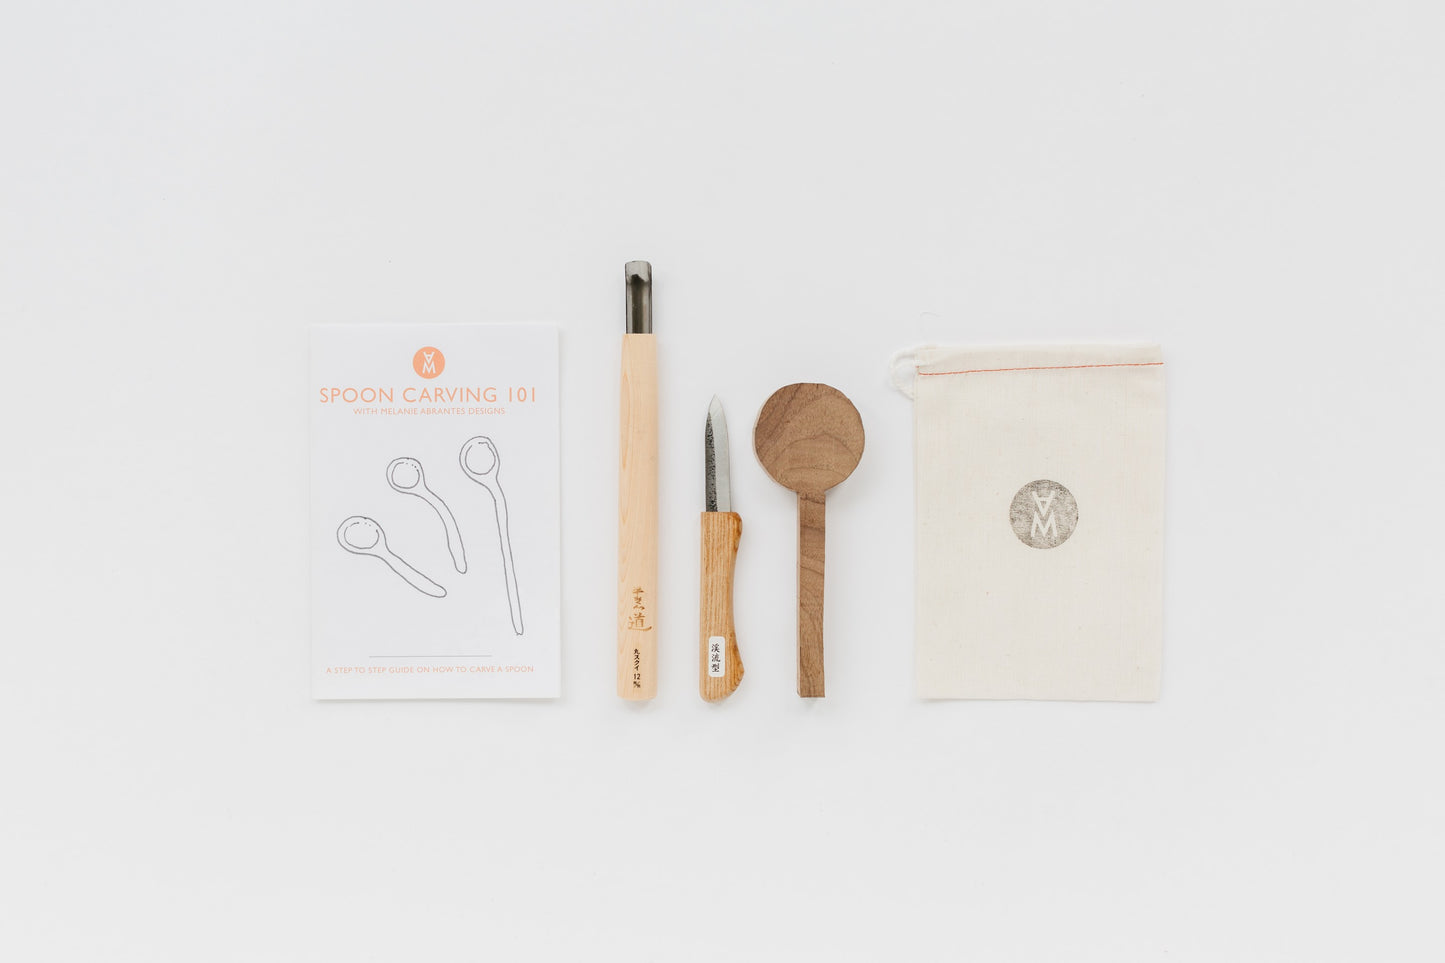 Spoon carving instructions, spoon gouge, carving knife, walnut spoon blank, and a canvas bag laid out. By Melanie Abrantes Designs.